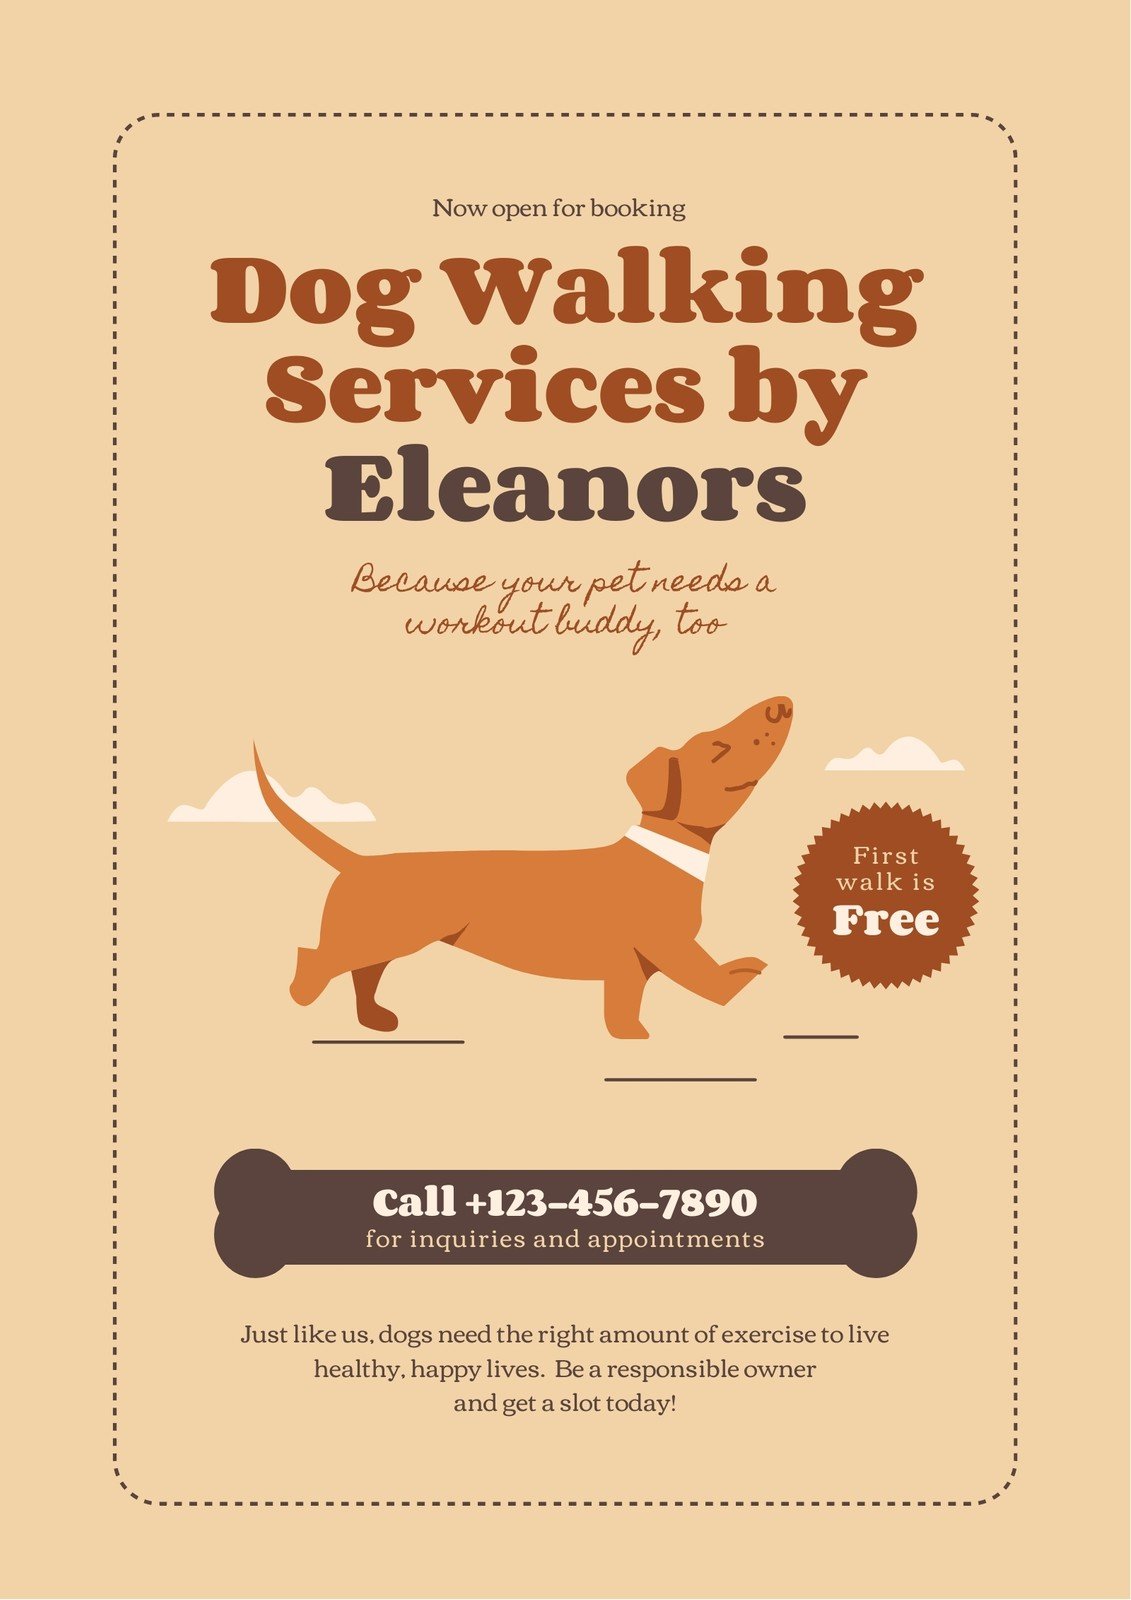 Customize 22+ Dog Walker Flyers Templates Online - Canva For Dog Walking Flyer Template Free